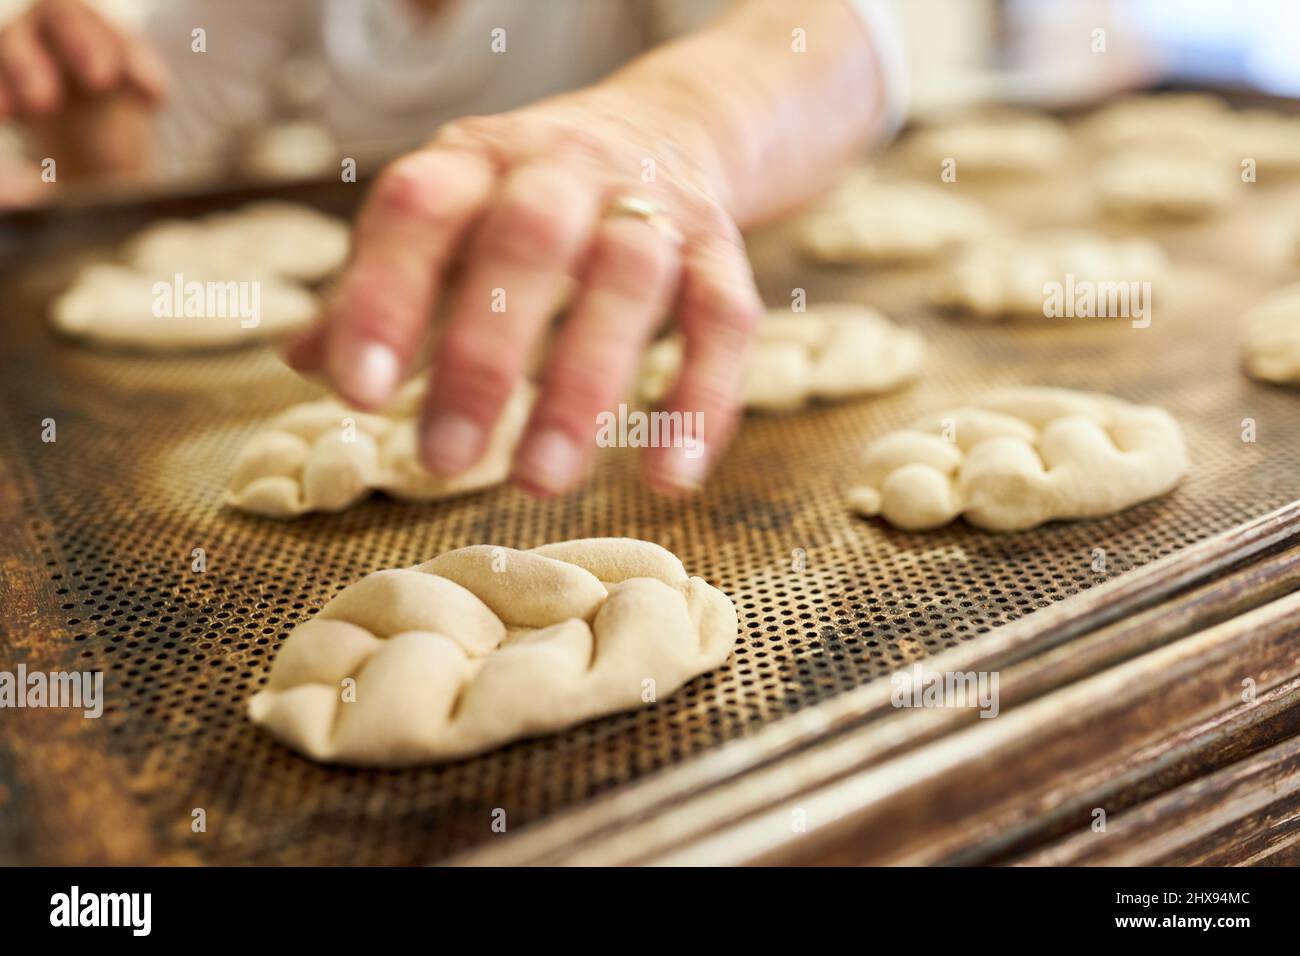 Baker's hand baking yeast plaited bread on a tray in the bakery Stock Photo